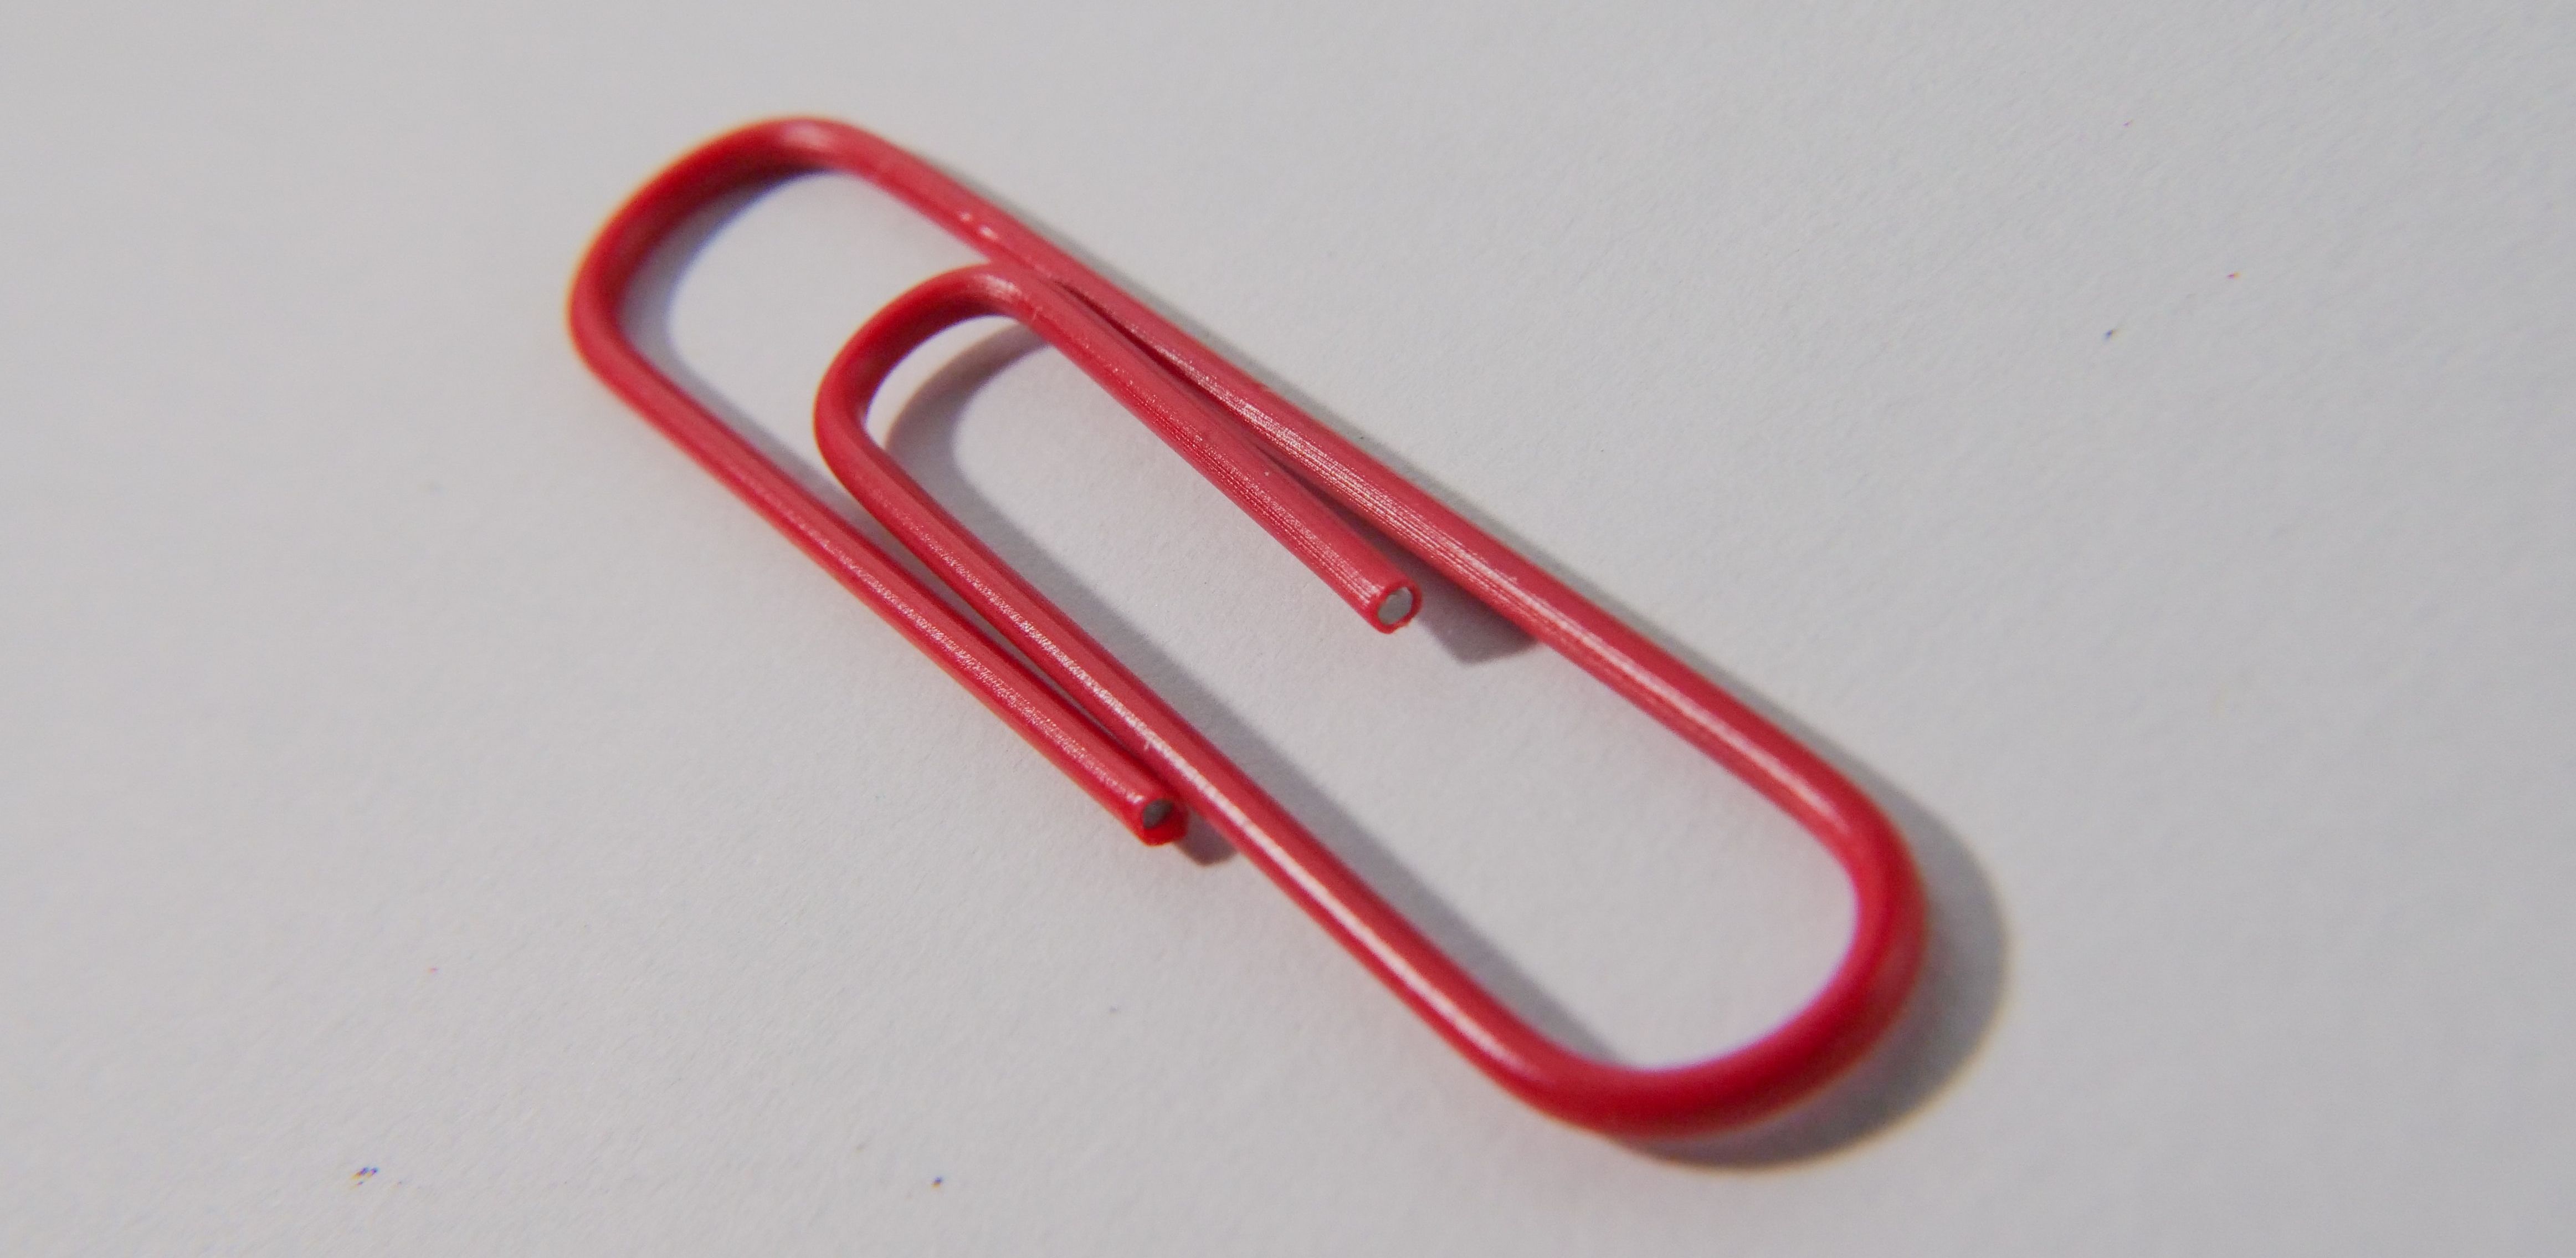 red paperclip on desk